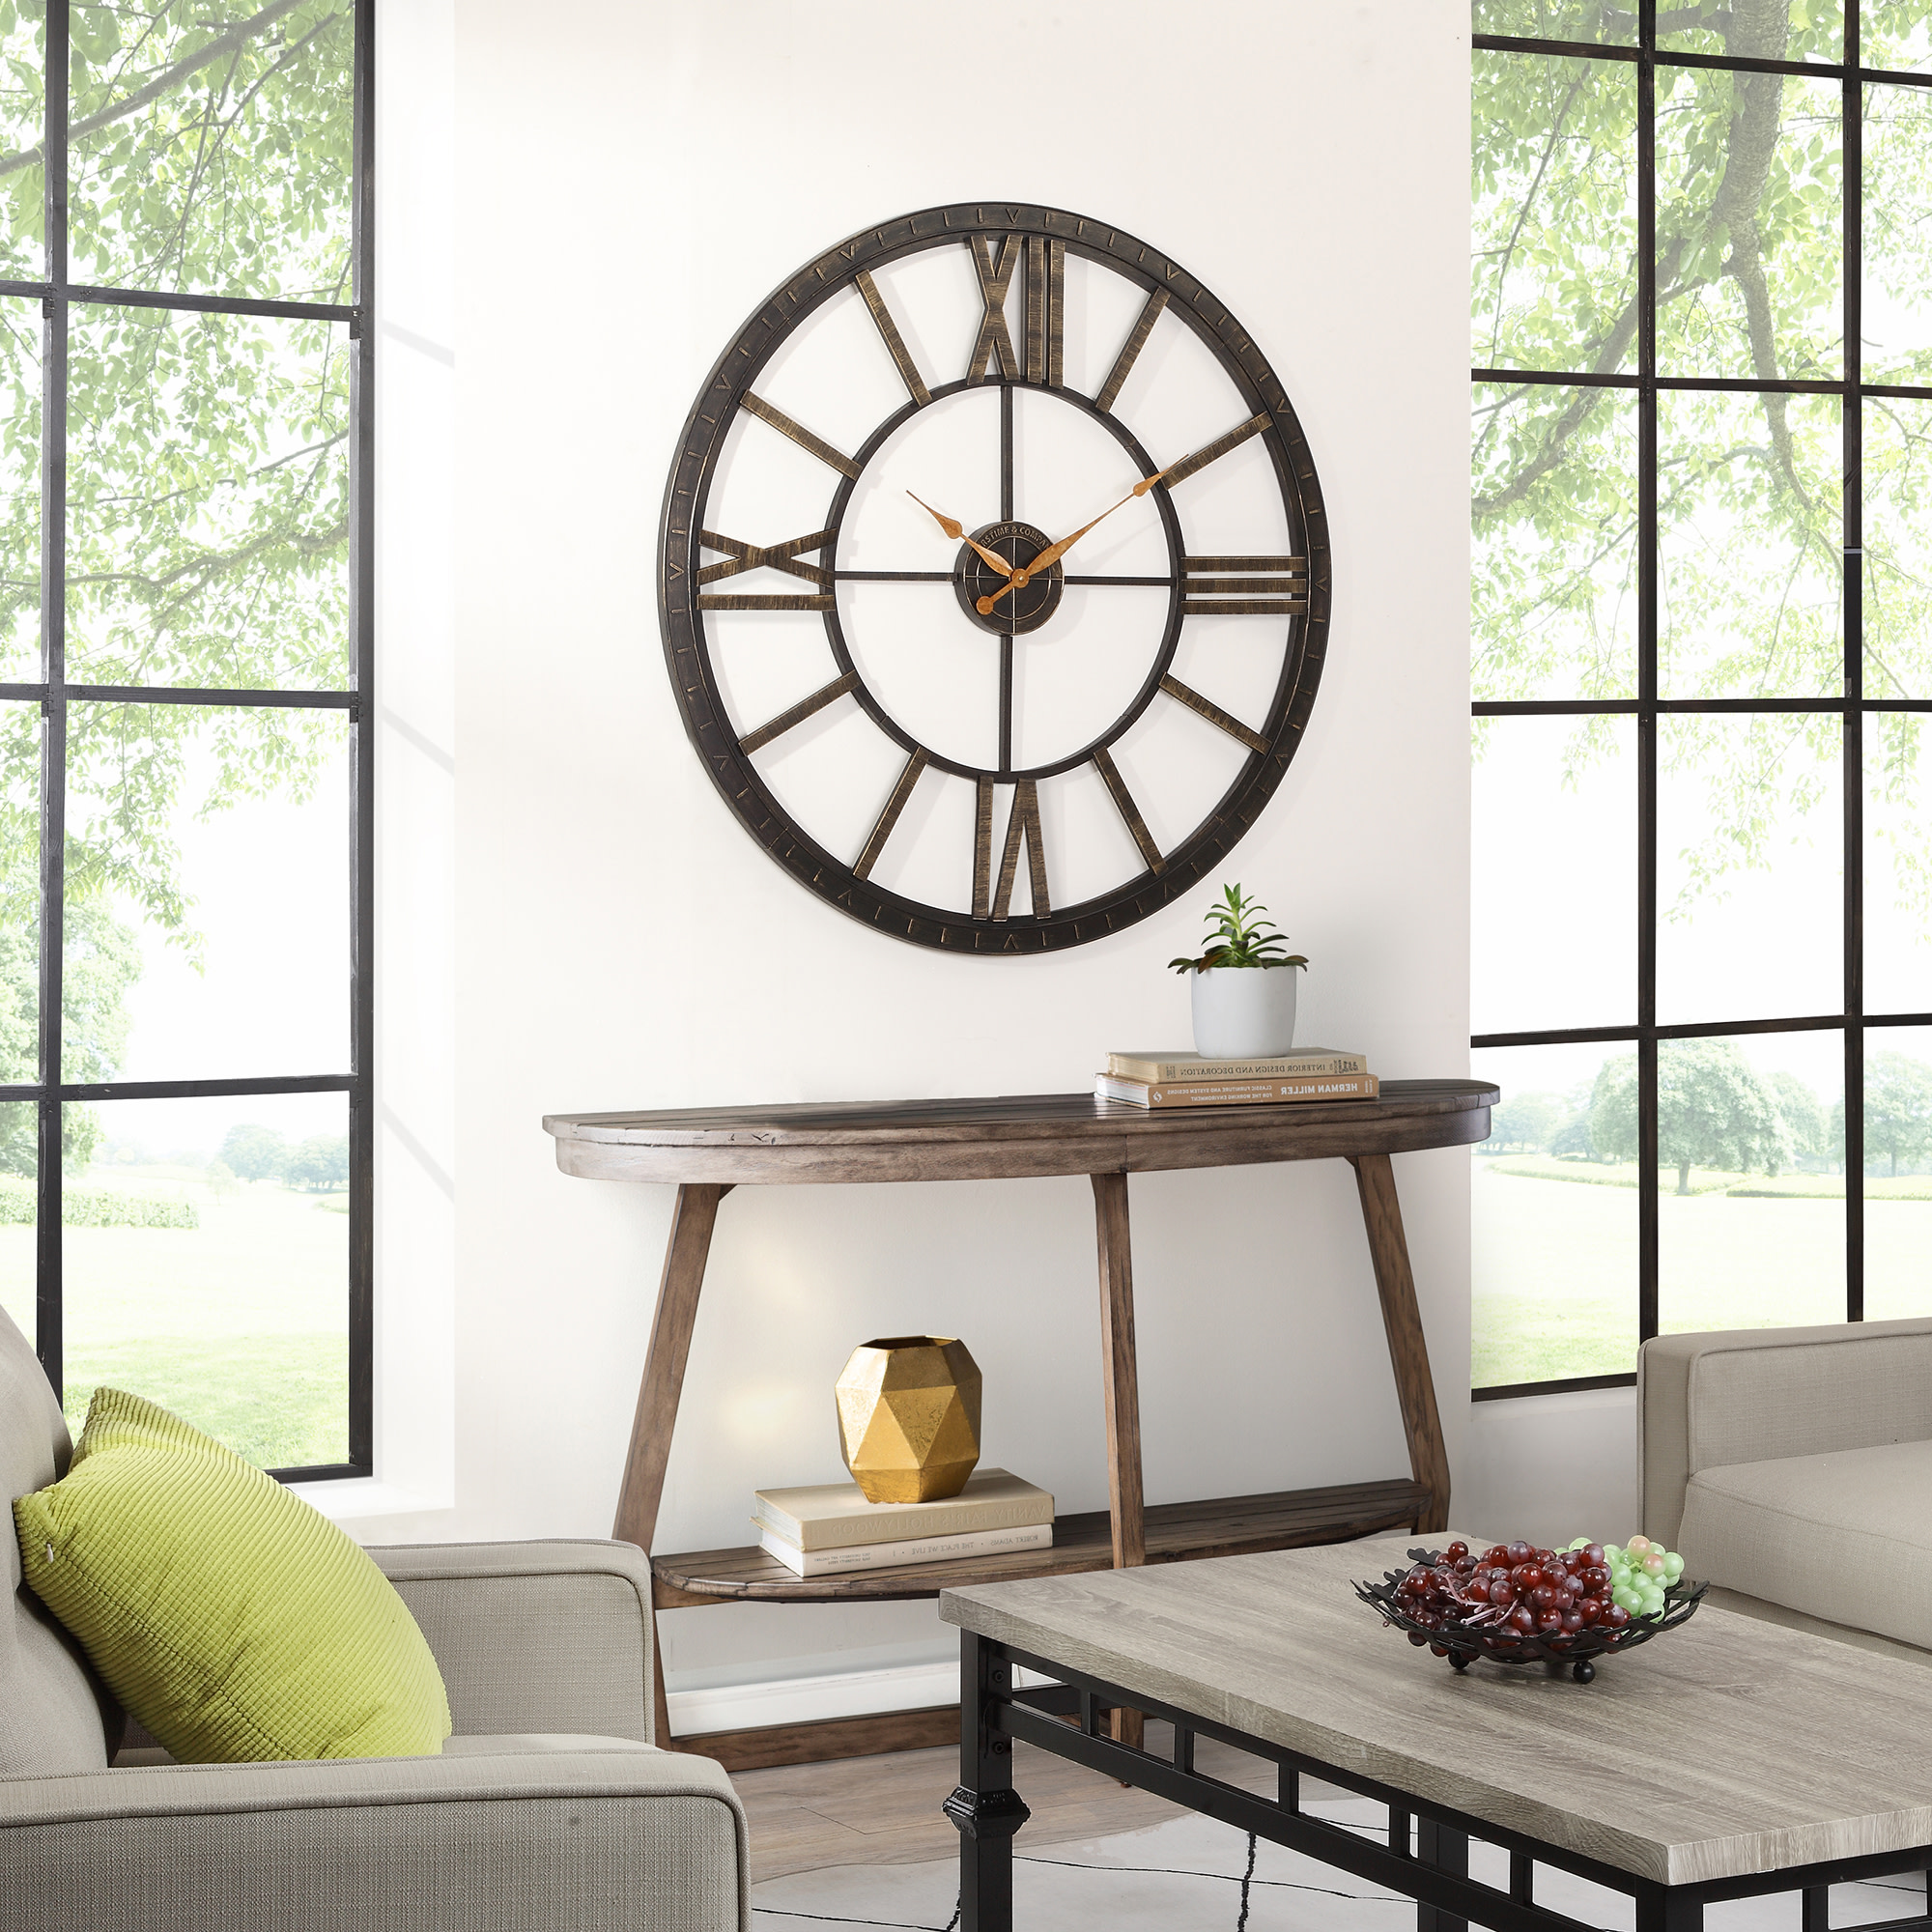 FirsTime & Co. Bronze Big Time Wall Clock, Modern, Analog, 40 x 2 x 40 in - image 1 of 8